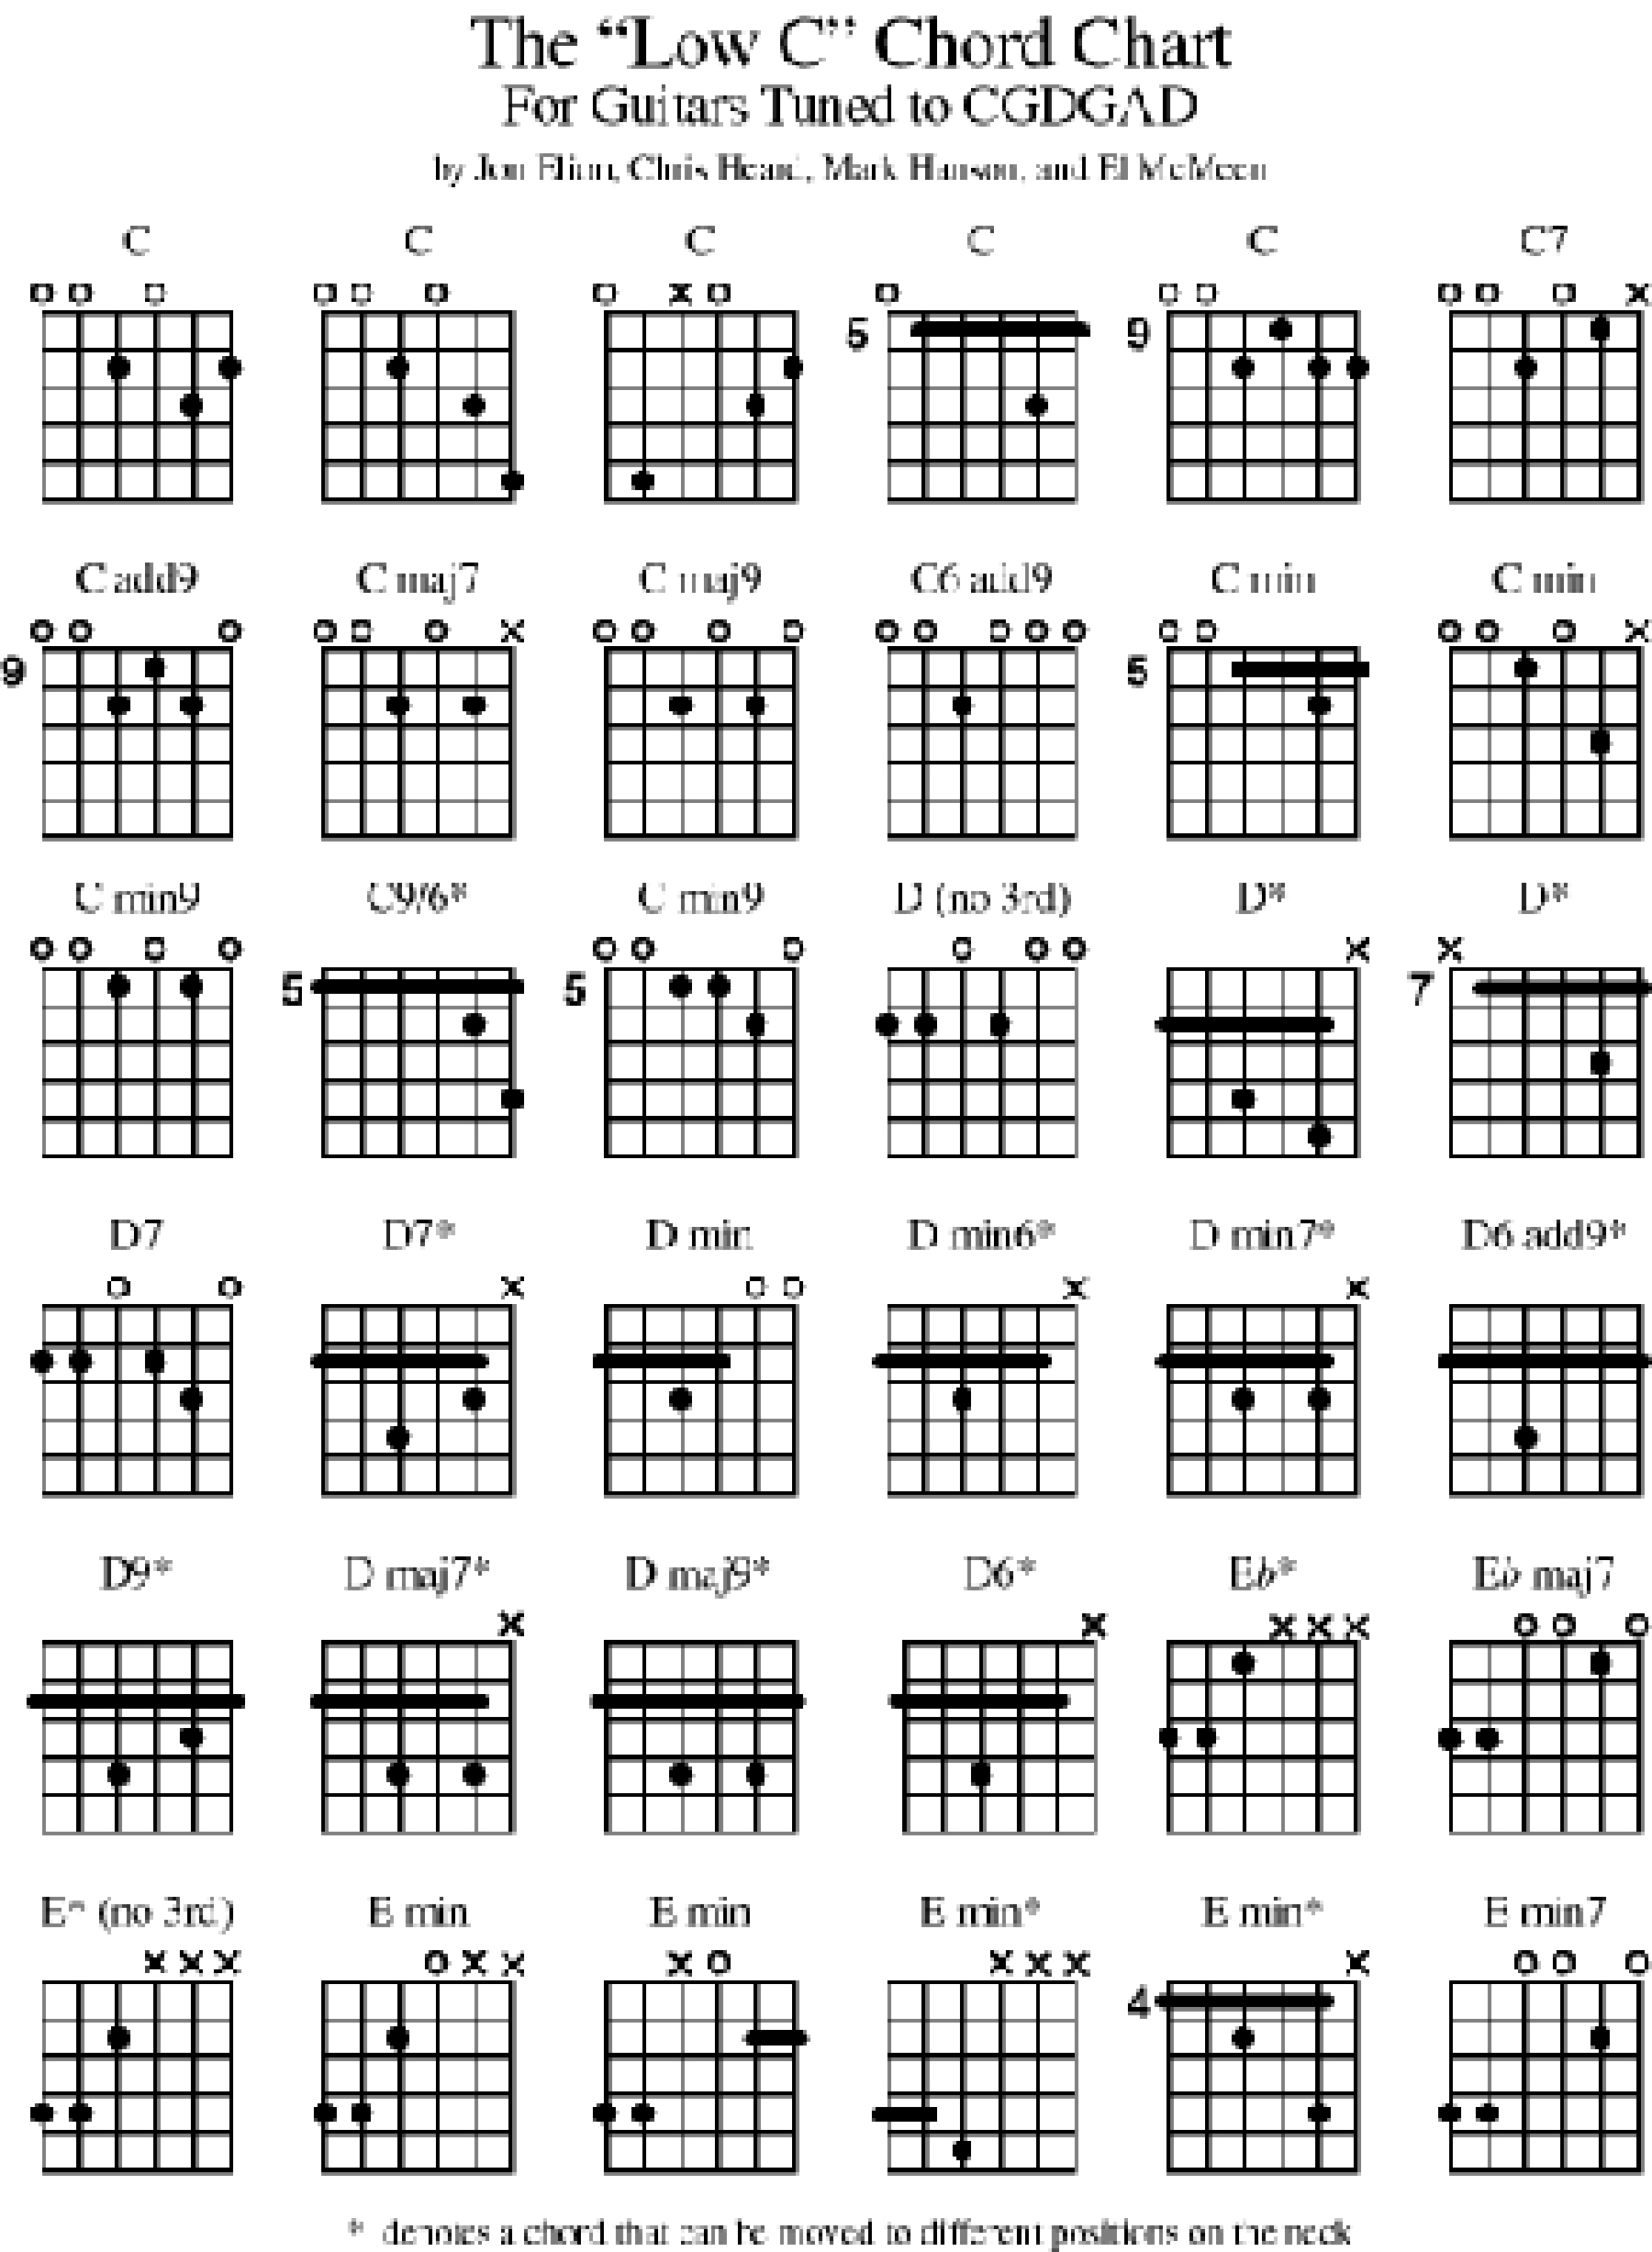 guitar tuning chord chart mcmeen low chords open el tabs playing tune acoustic tab diagrams guide alternate